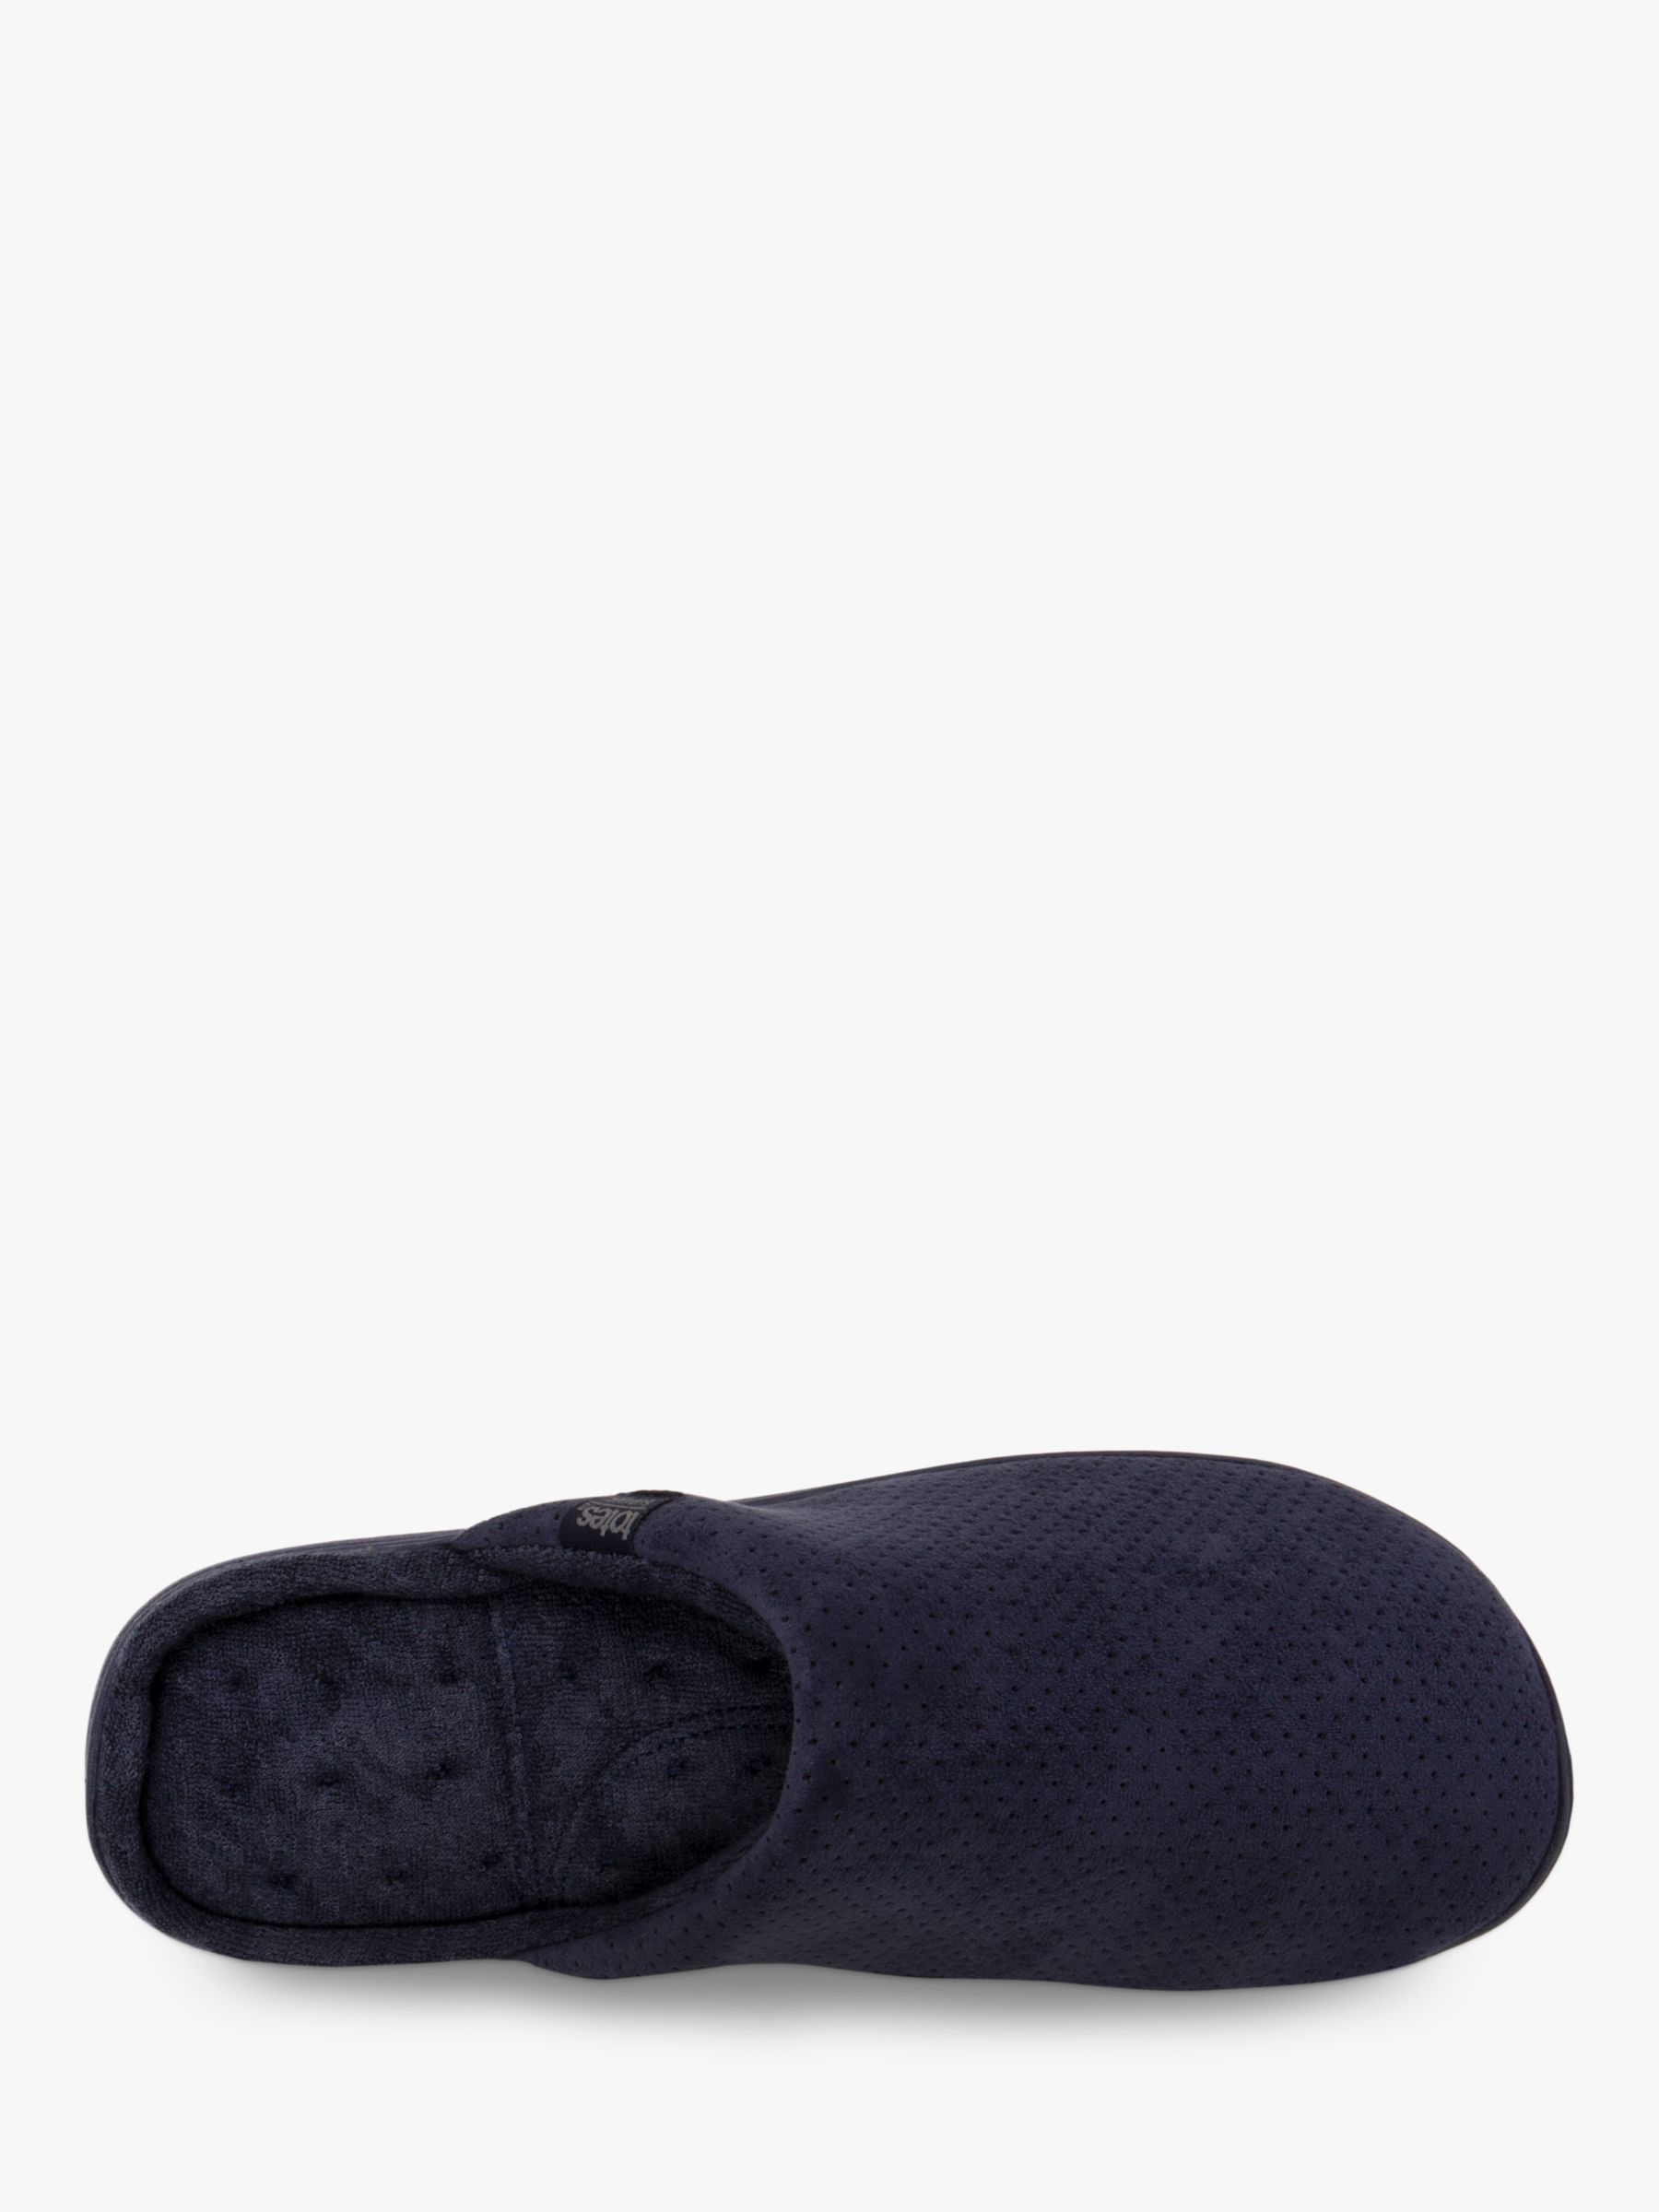 totes Airtex Suedette Mule Slippers, Navy at John Lewis & Partners